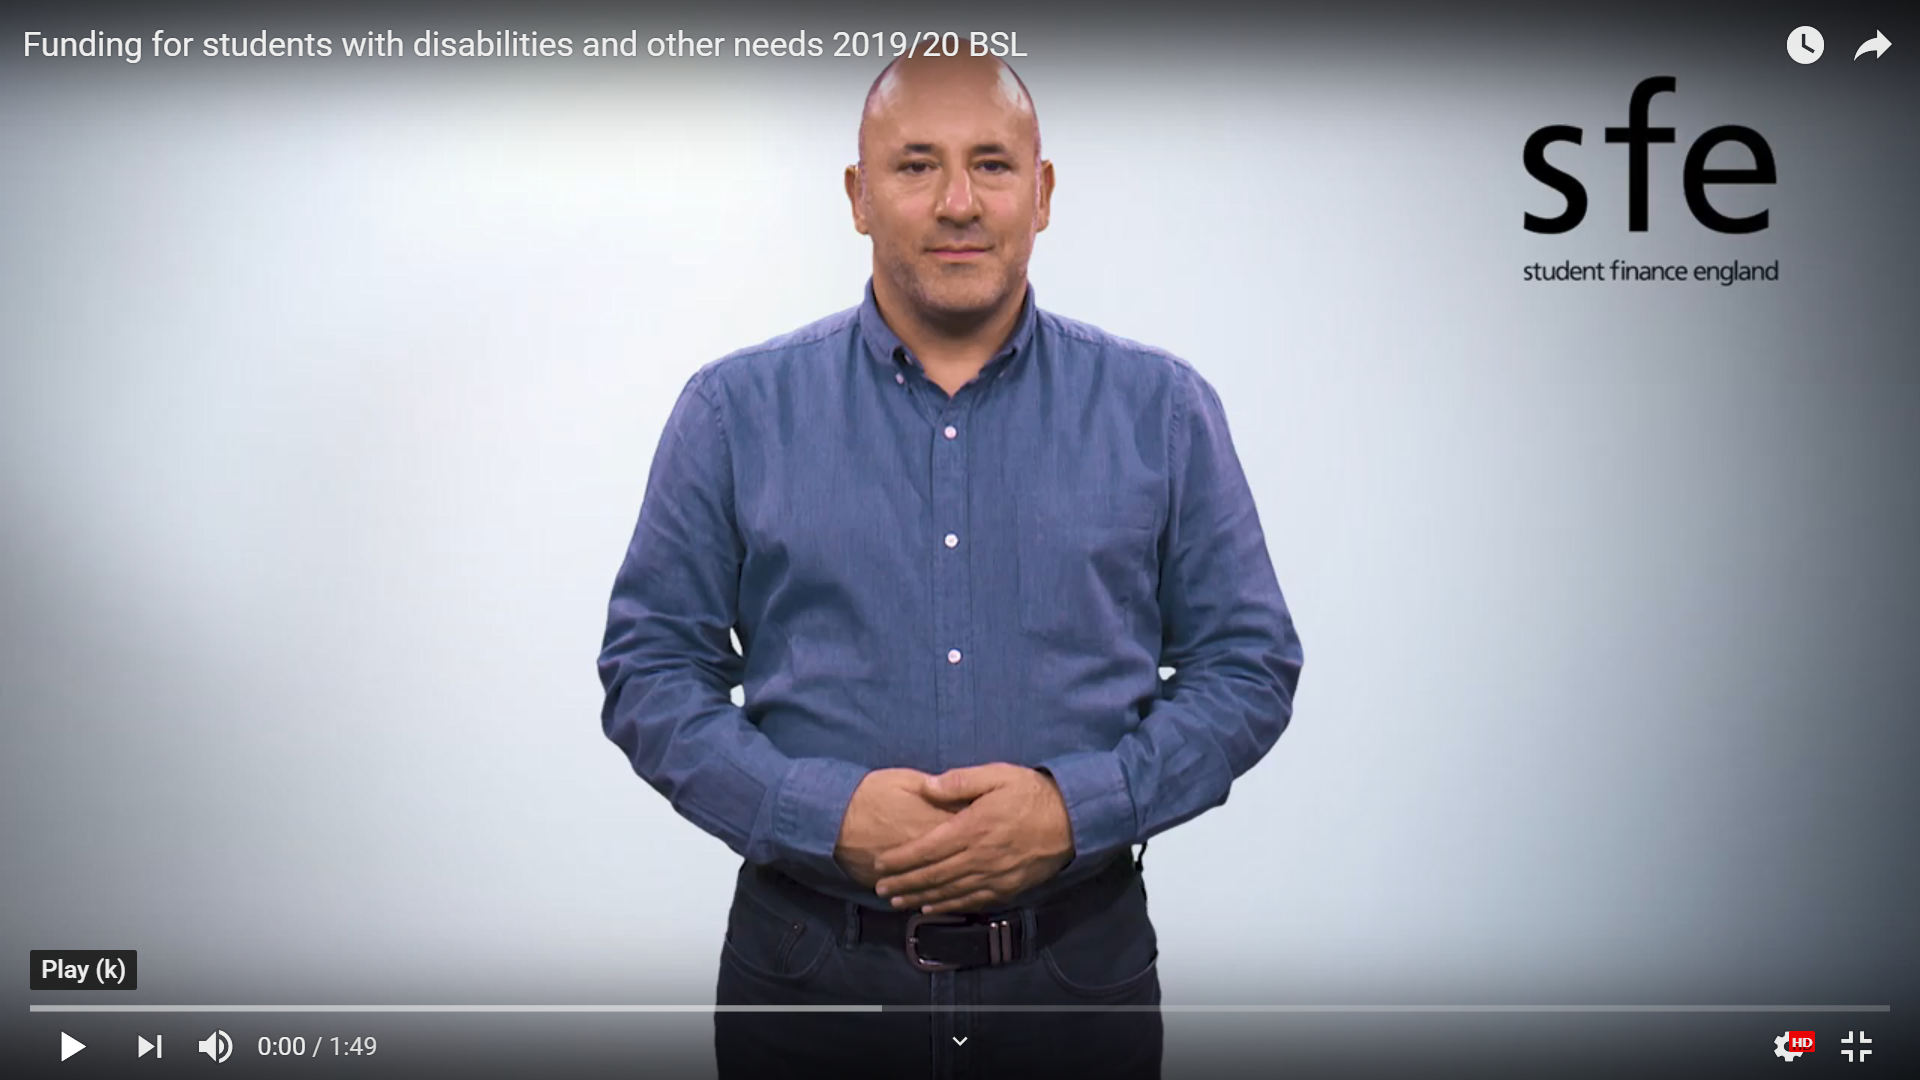 BSL video outlining funding for students with disabilities and other needs. 